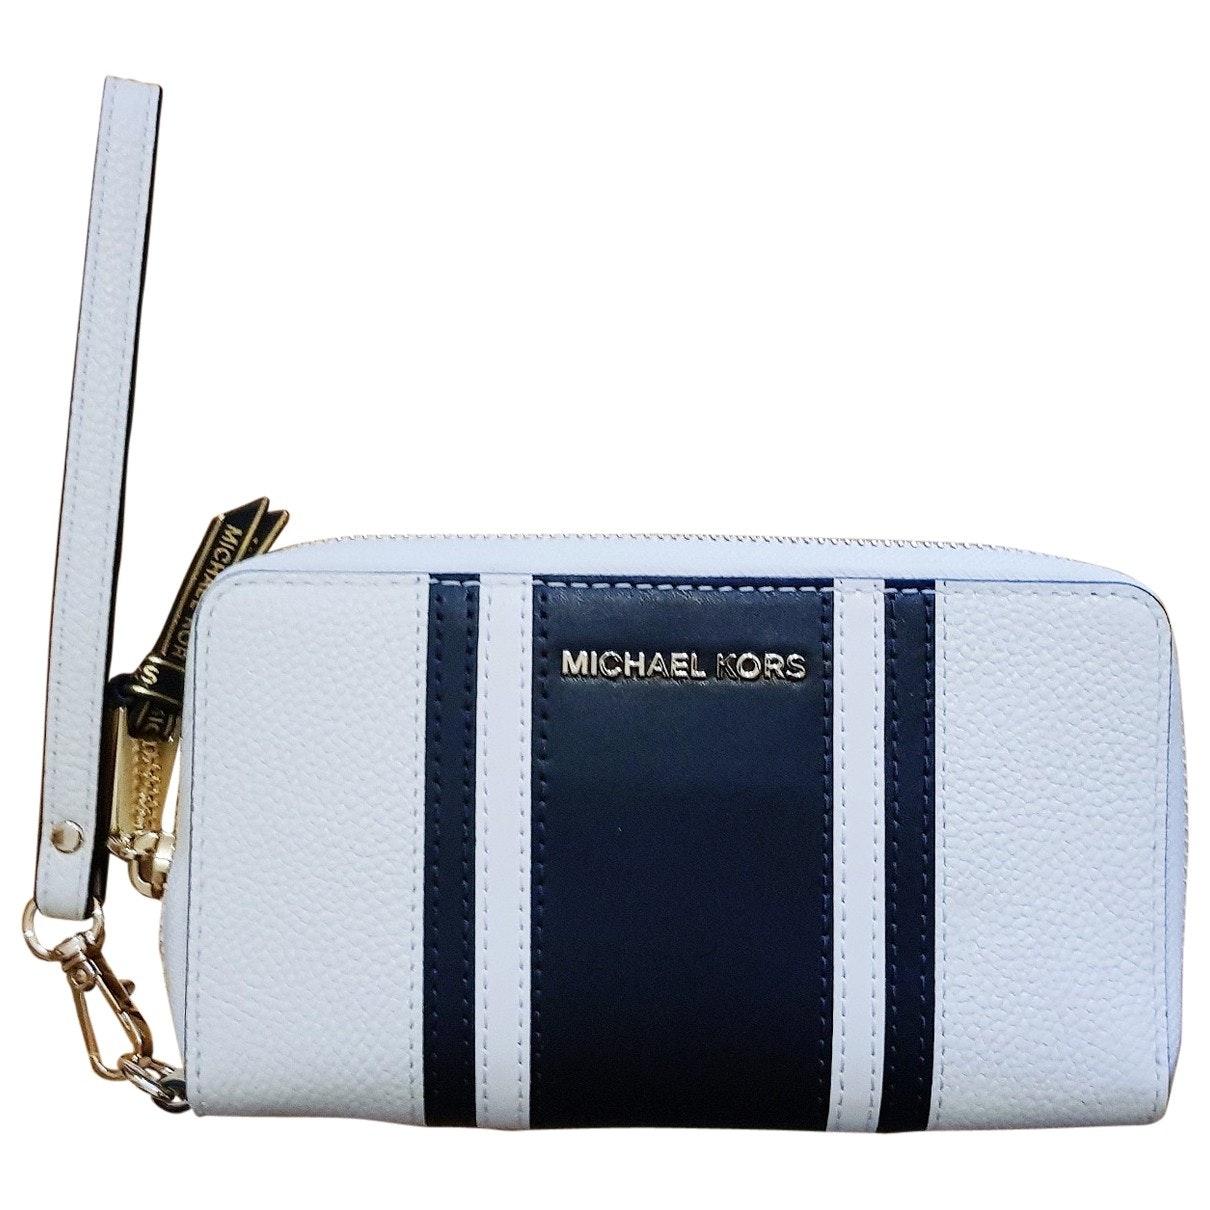 Michael Kors Leather Wallet in White (Blue) - Lyst